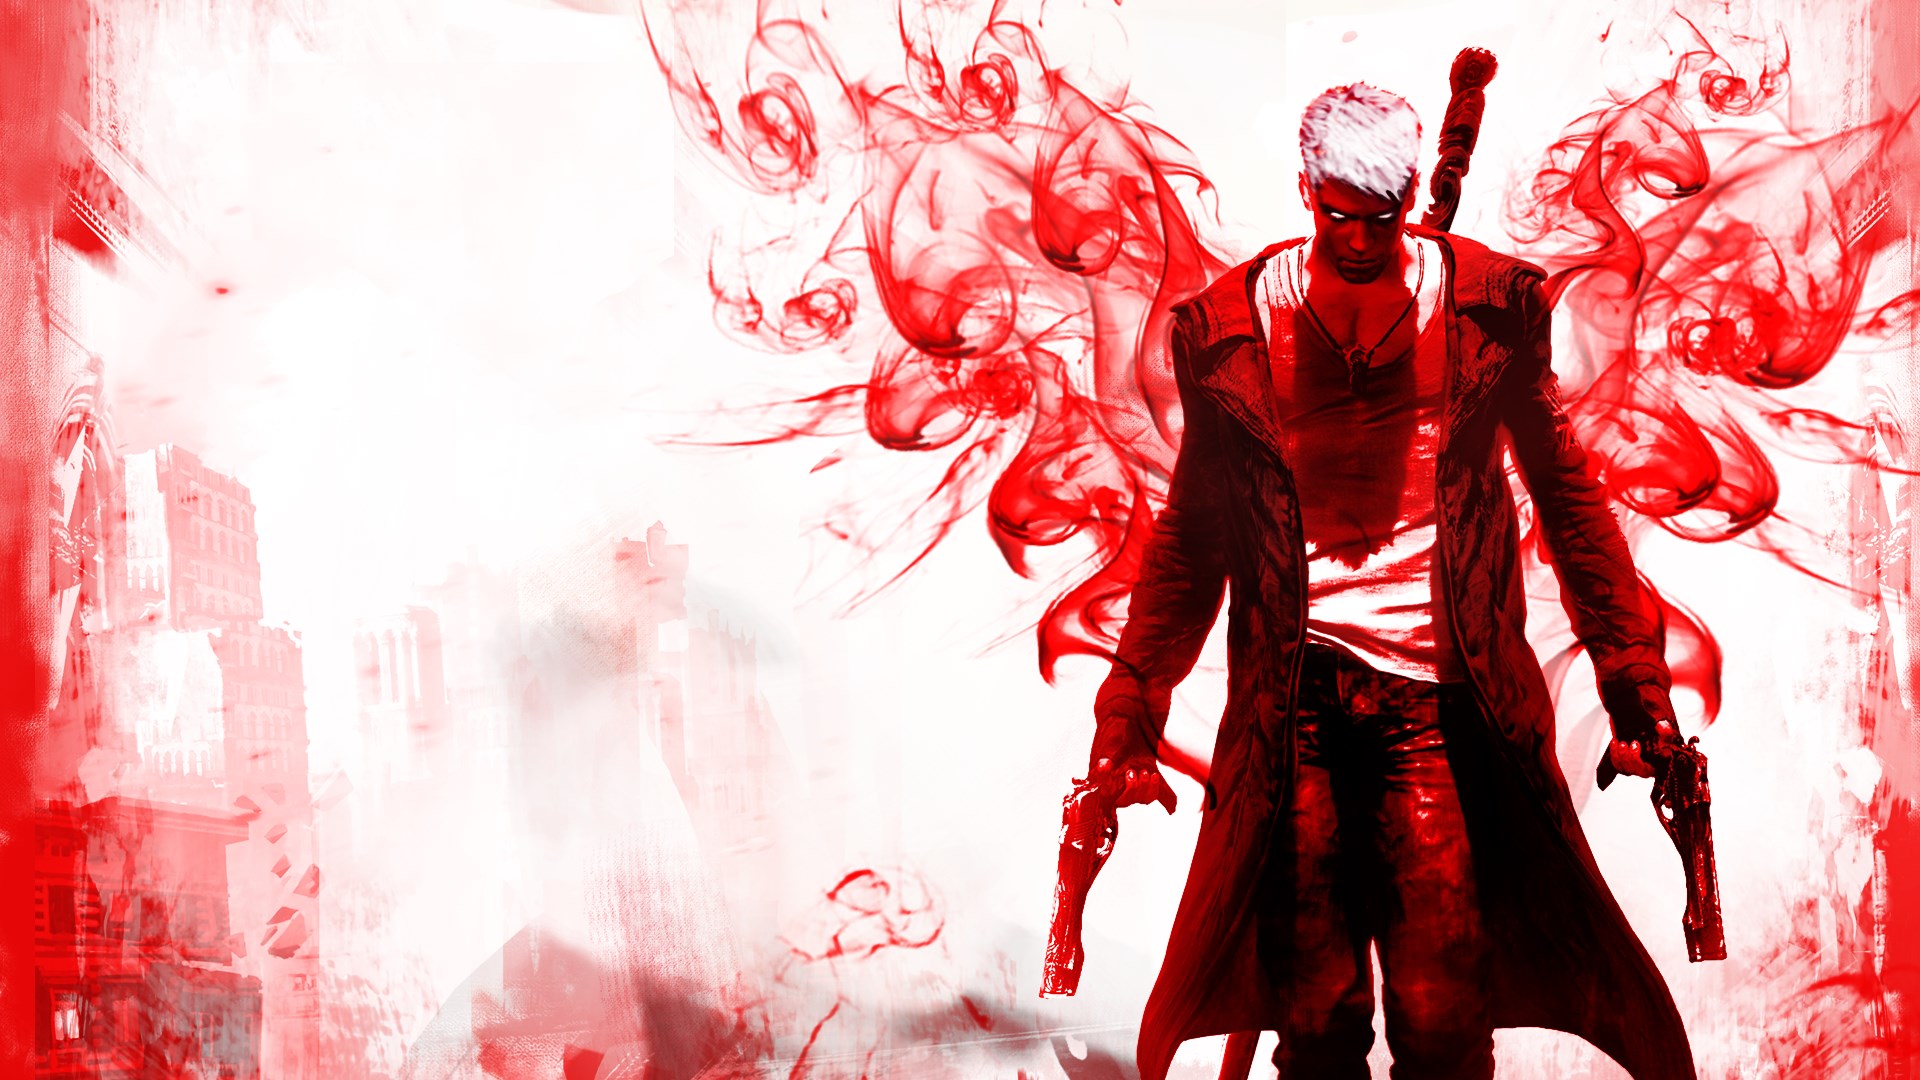 DmC: Devil May Cry Review –